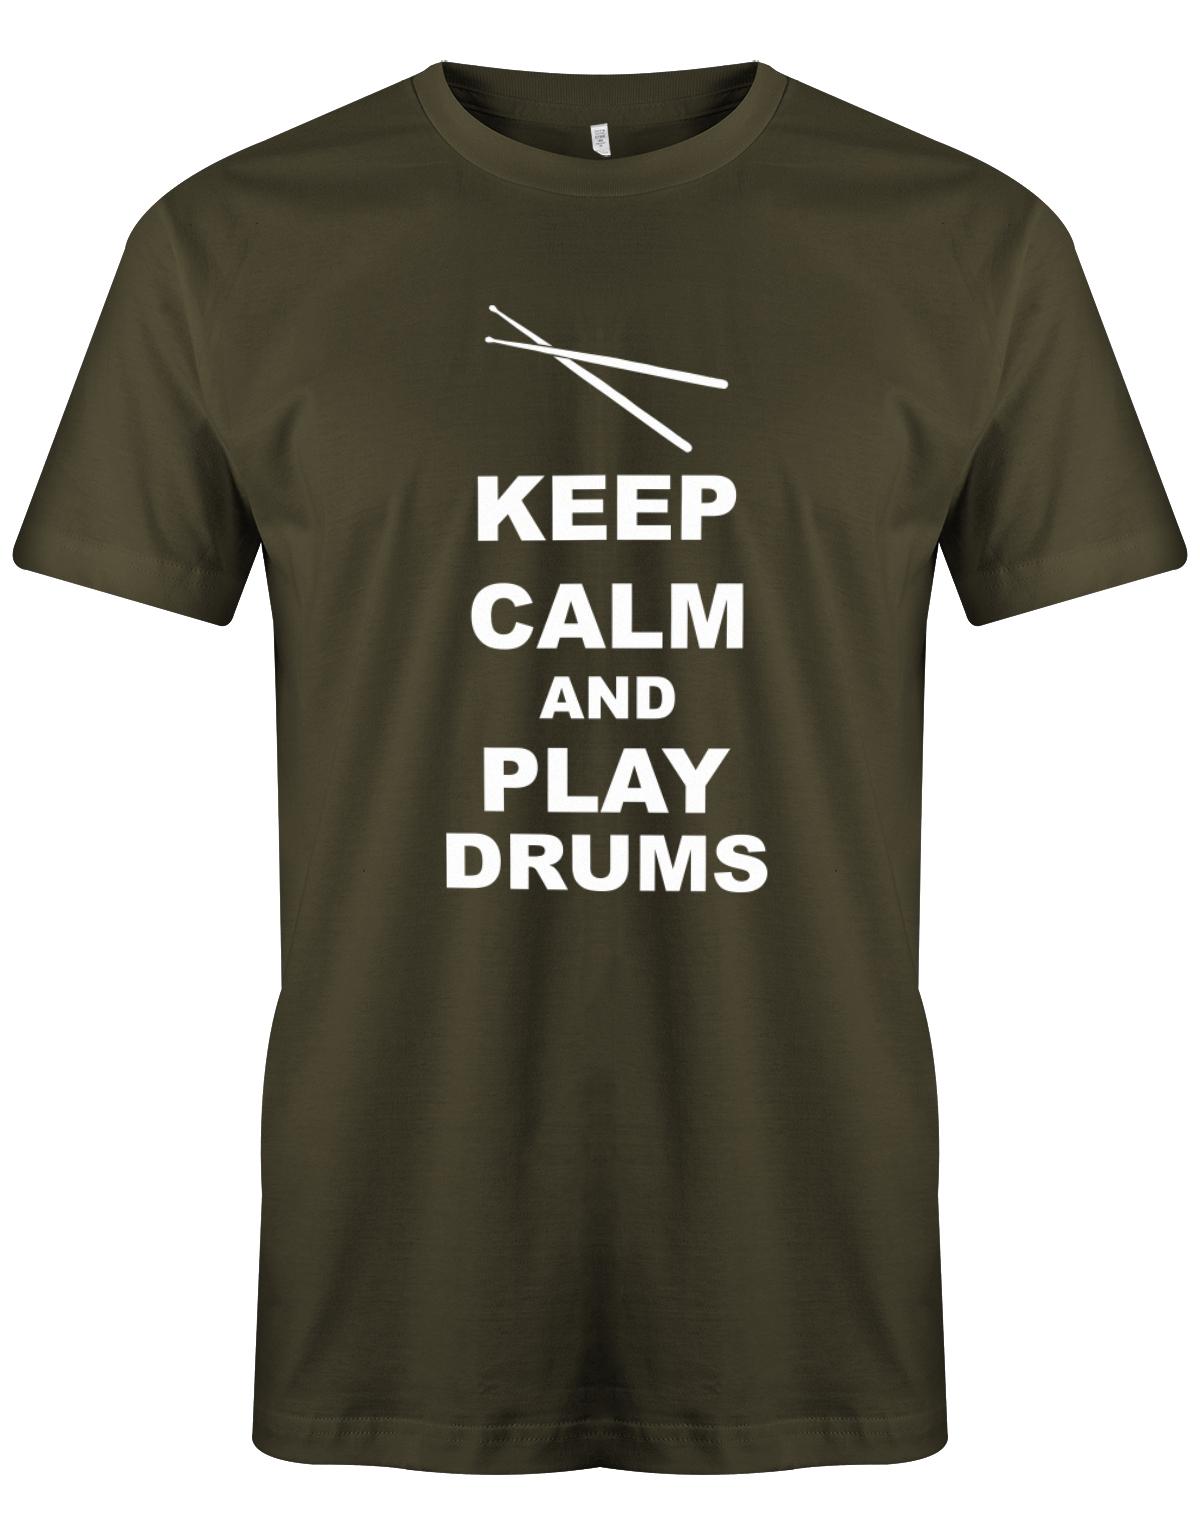 Keep-Calm-and-play-Drums-Herren-Shirt-Army